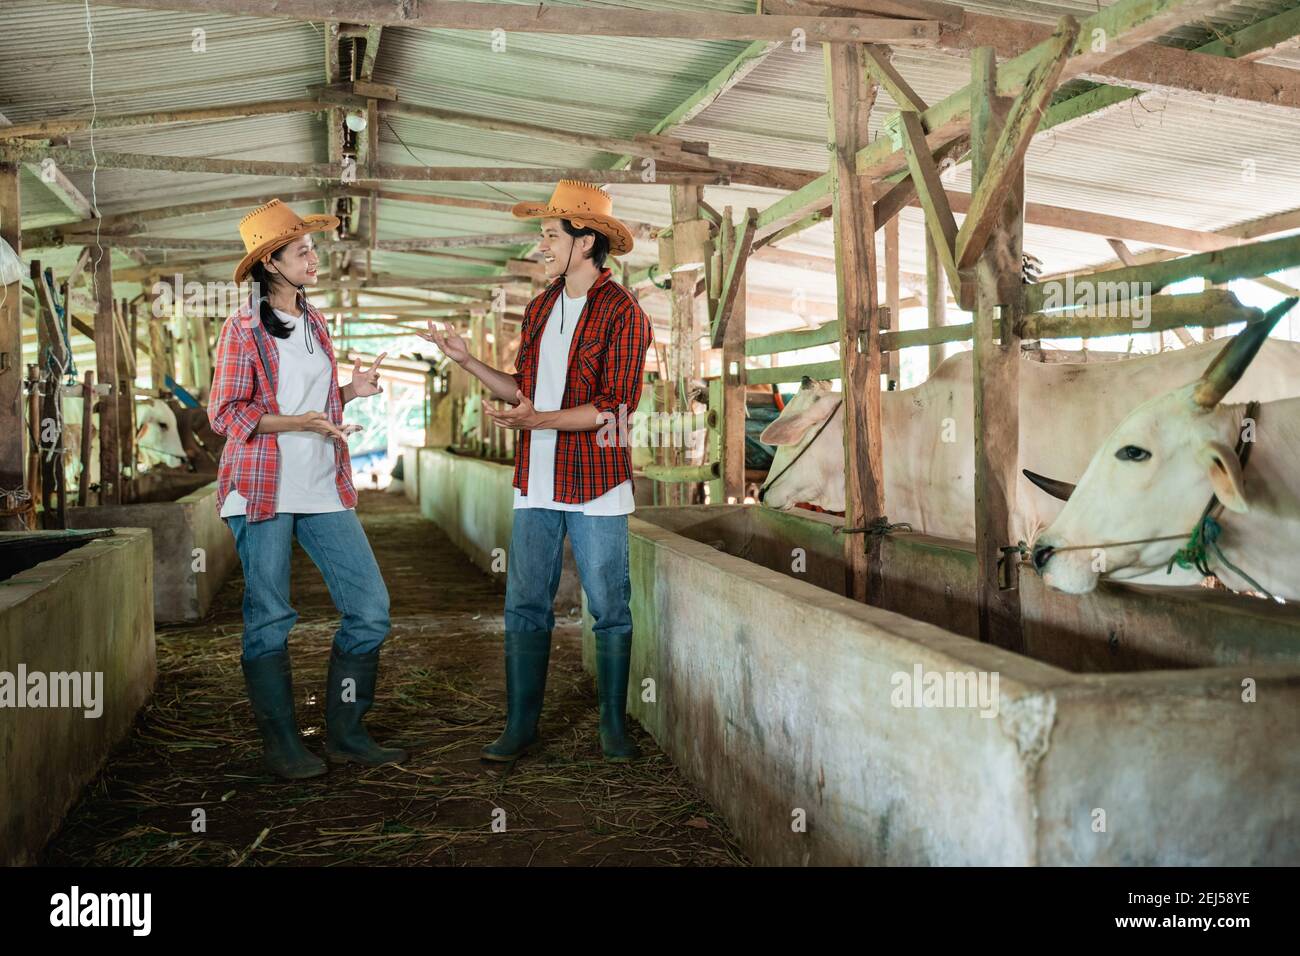 two farmers wearing cowboy hats are standing chatting in the cattle shed in the background Stock Photo